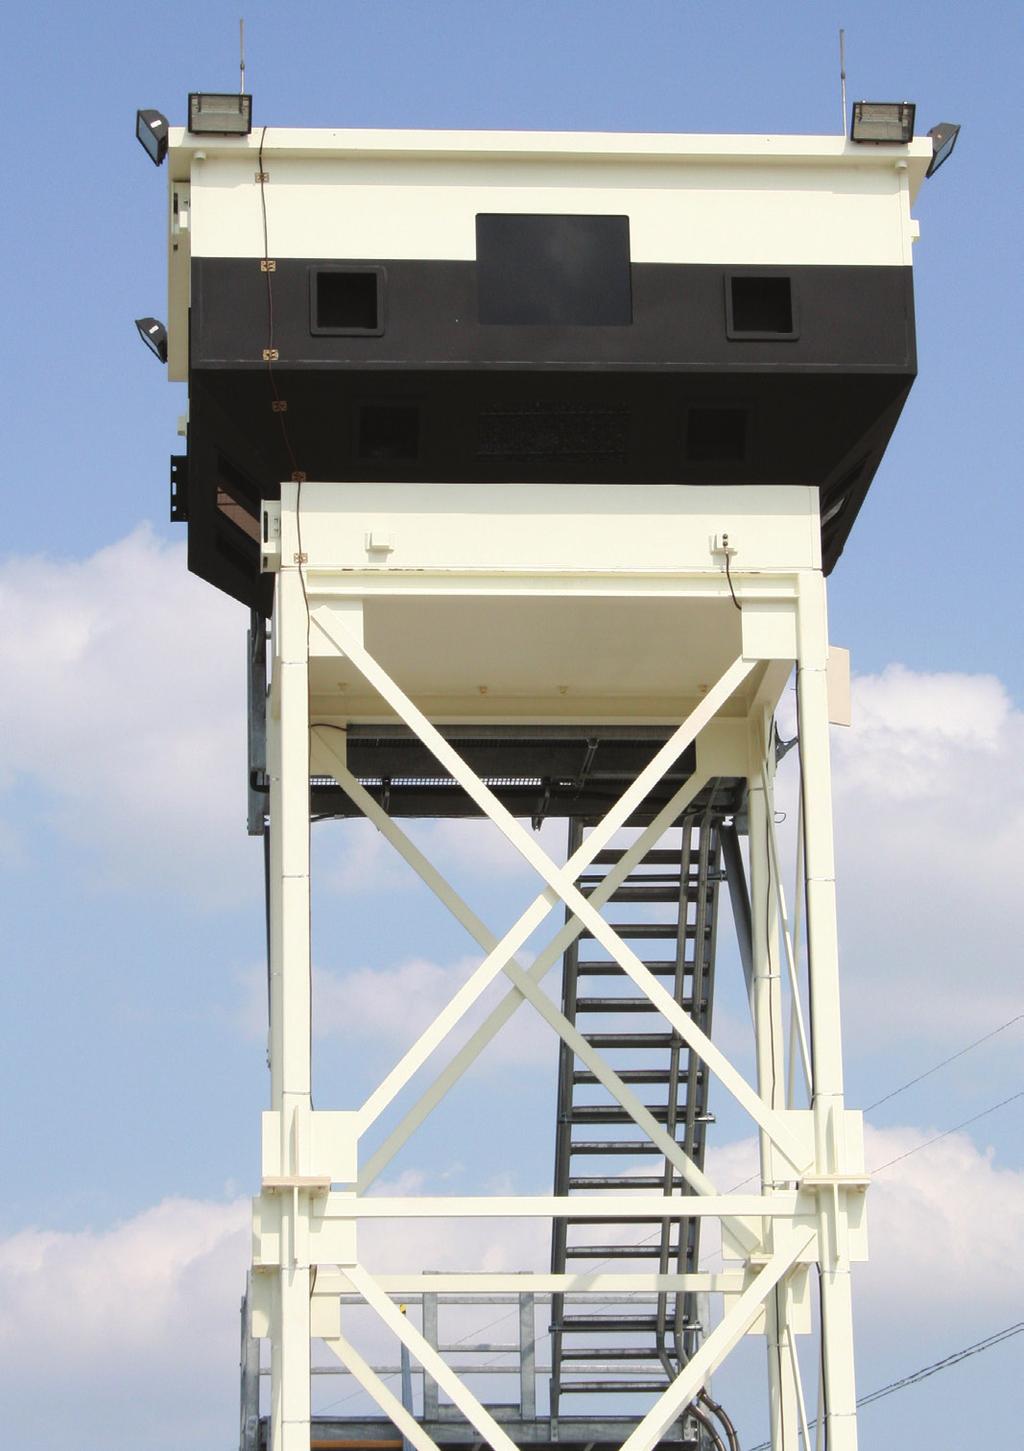 BULLET & BLAST RESISTANT GUARD BOOTHS GUARD BOOTHS GUARD TOWERS PROTECH Blast and